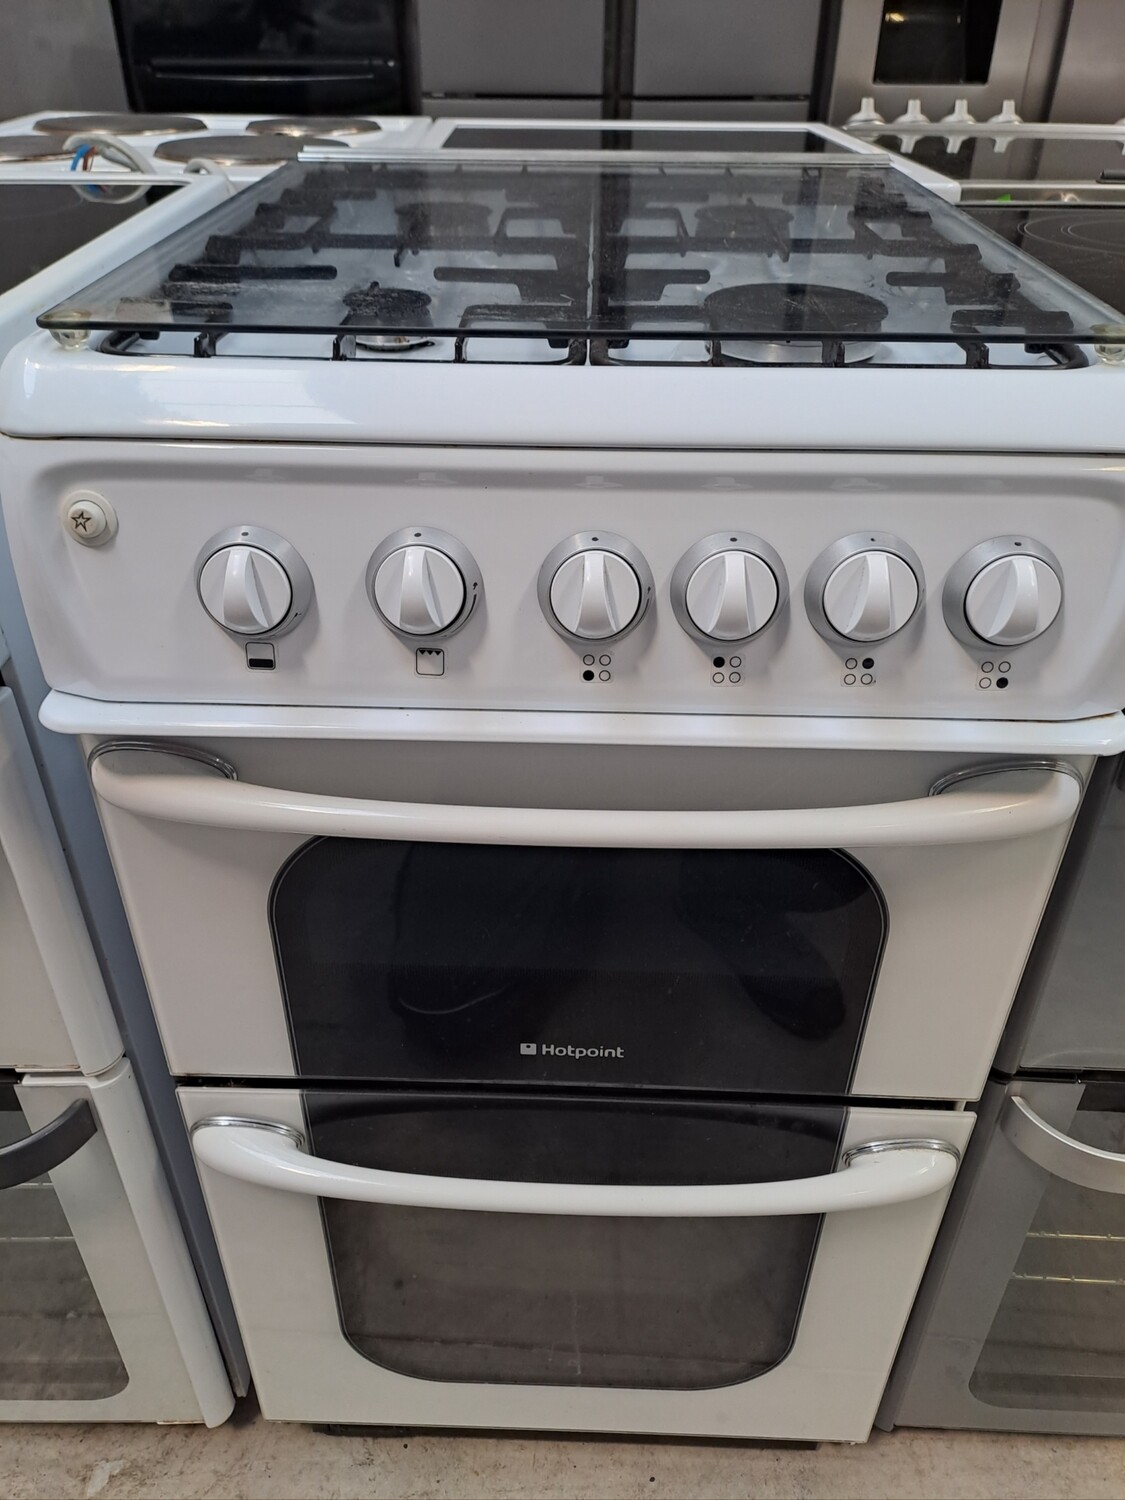 Hotpoint 52TGW 50cm Gas Cooker with Glass Lid White - Refurbished